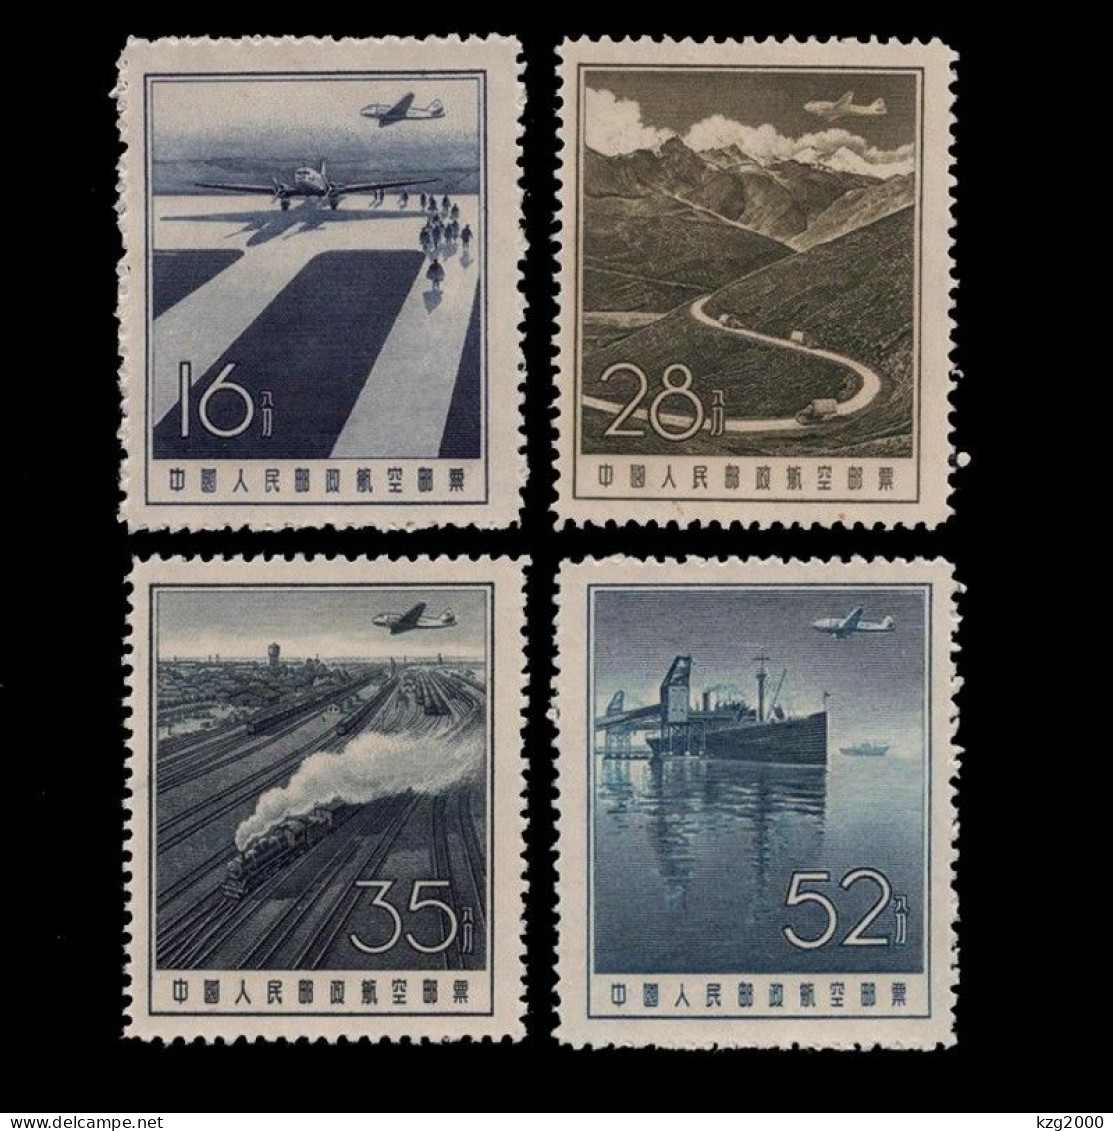 China Stamp 1957  A2  Air Mail Stamps MNH - Nuevos